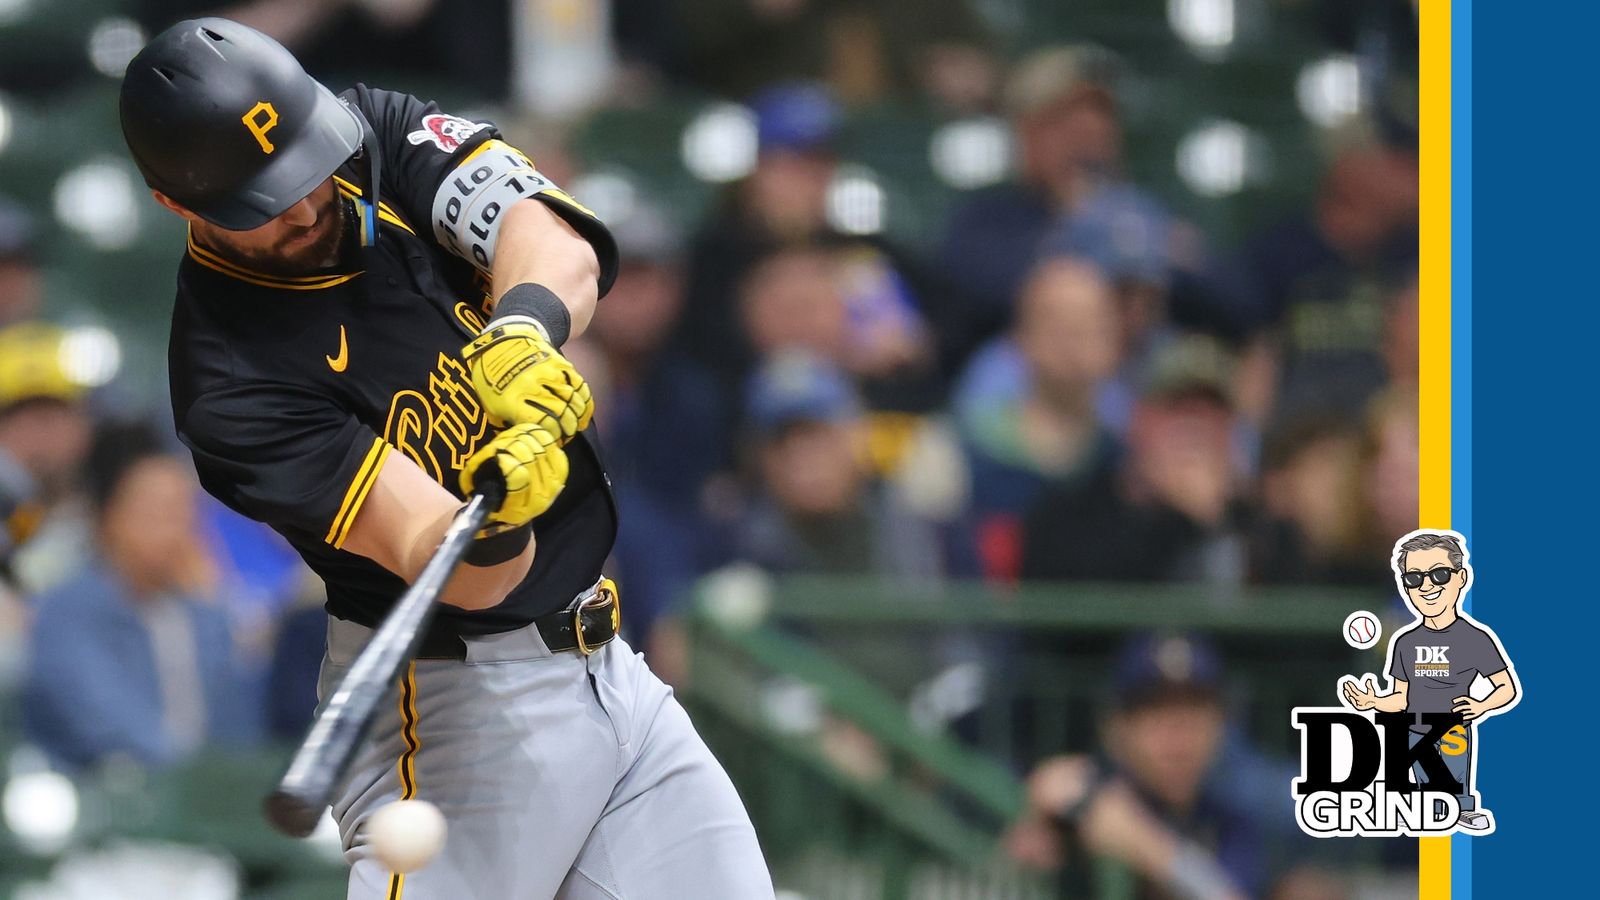 The Pirates' perpetual problem remains the offense